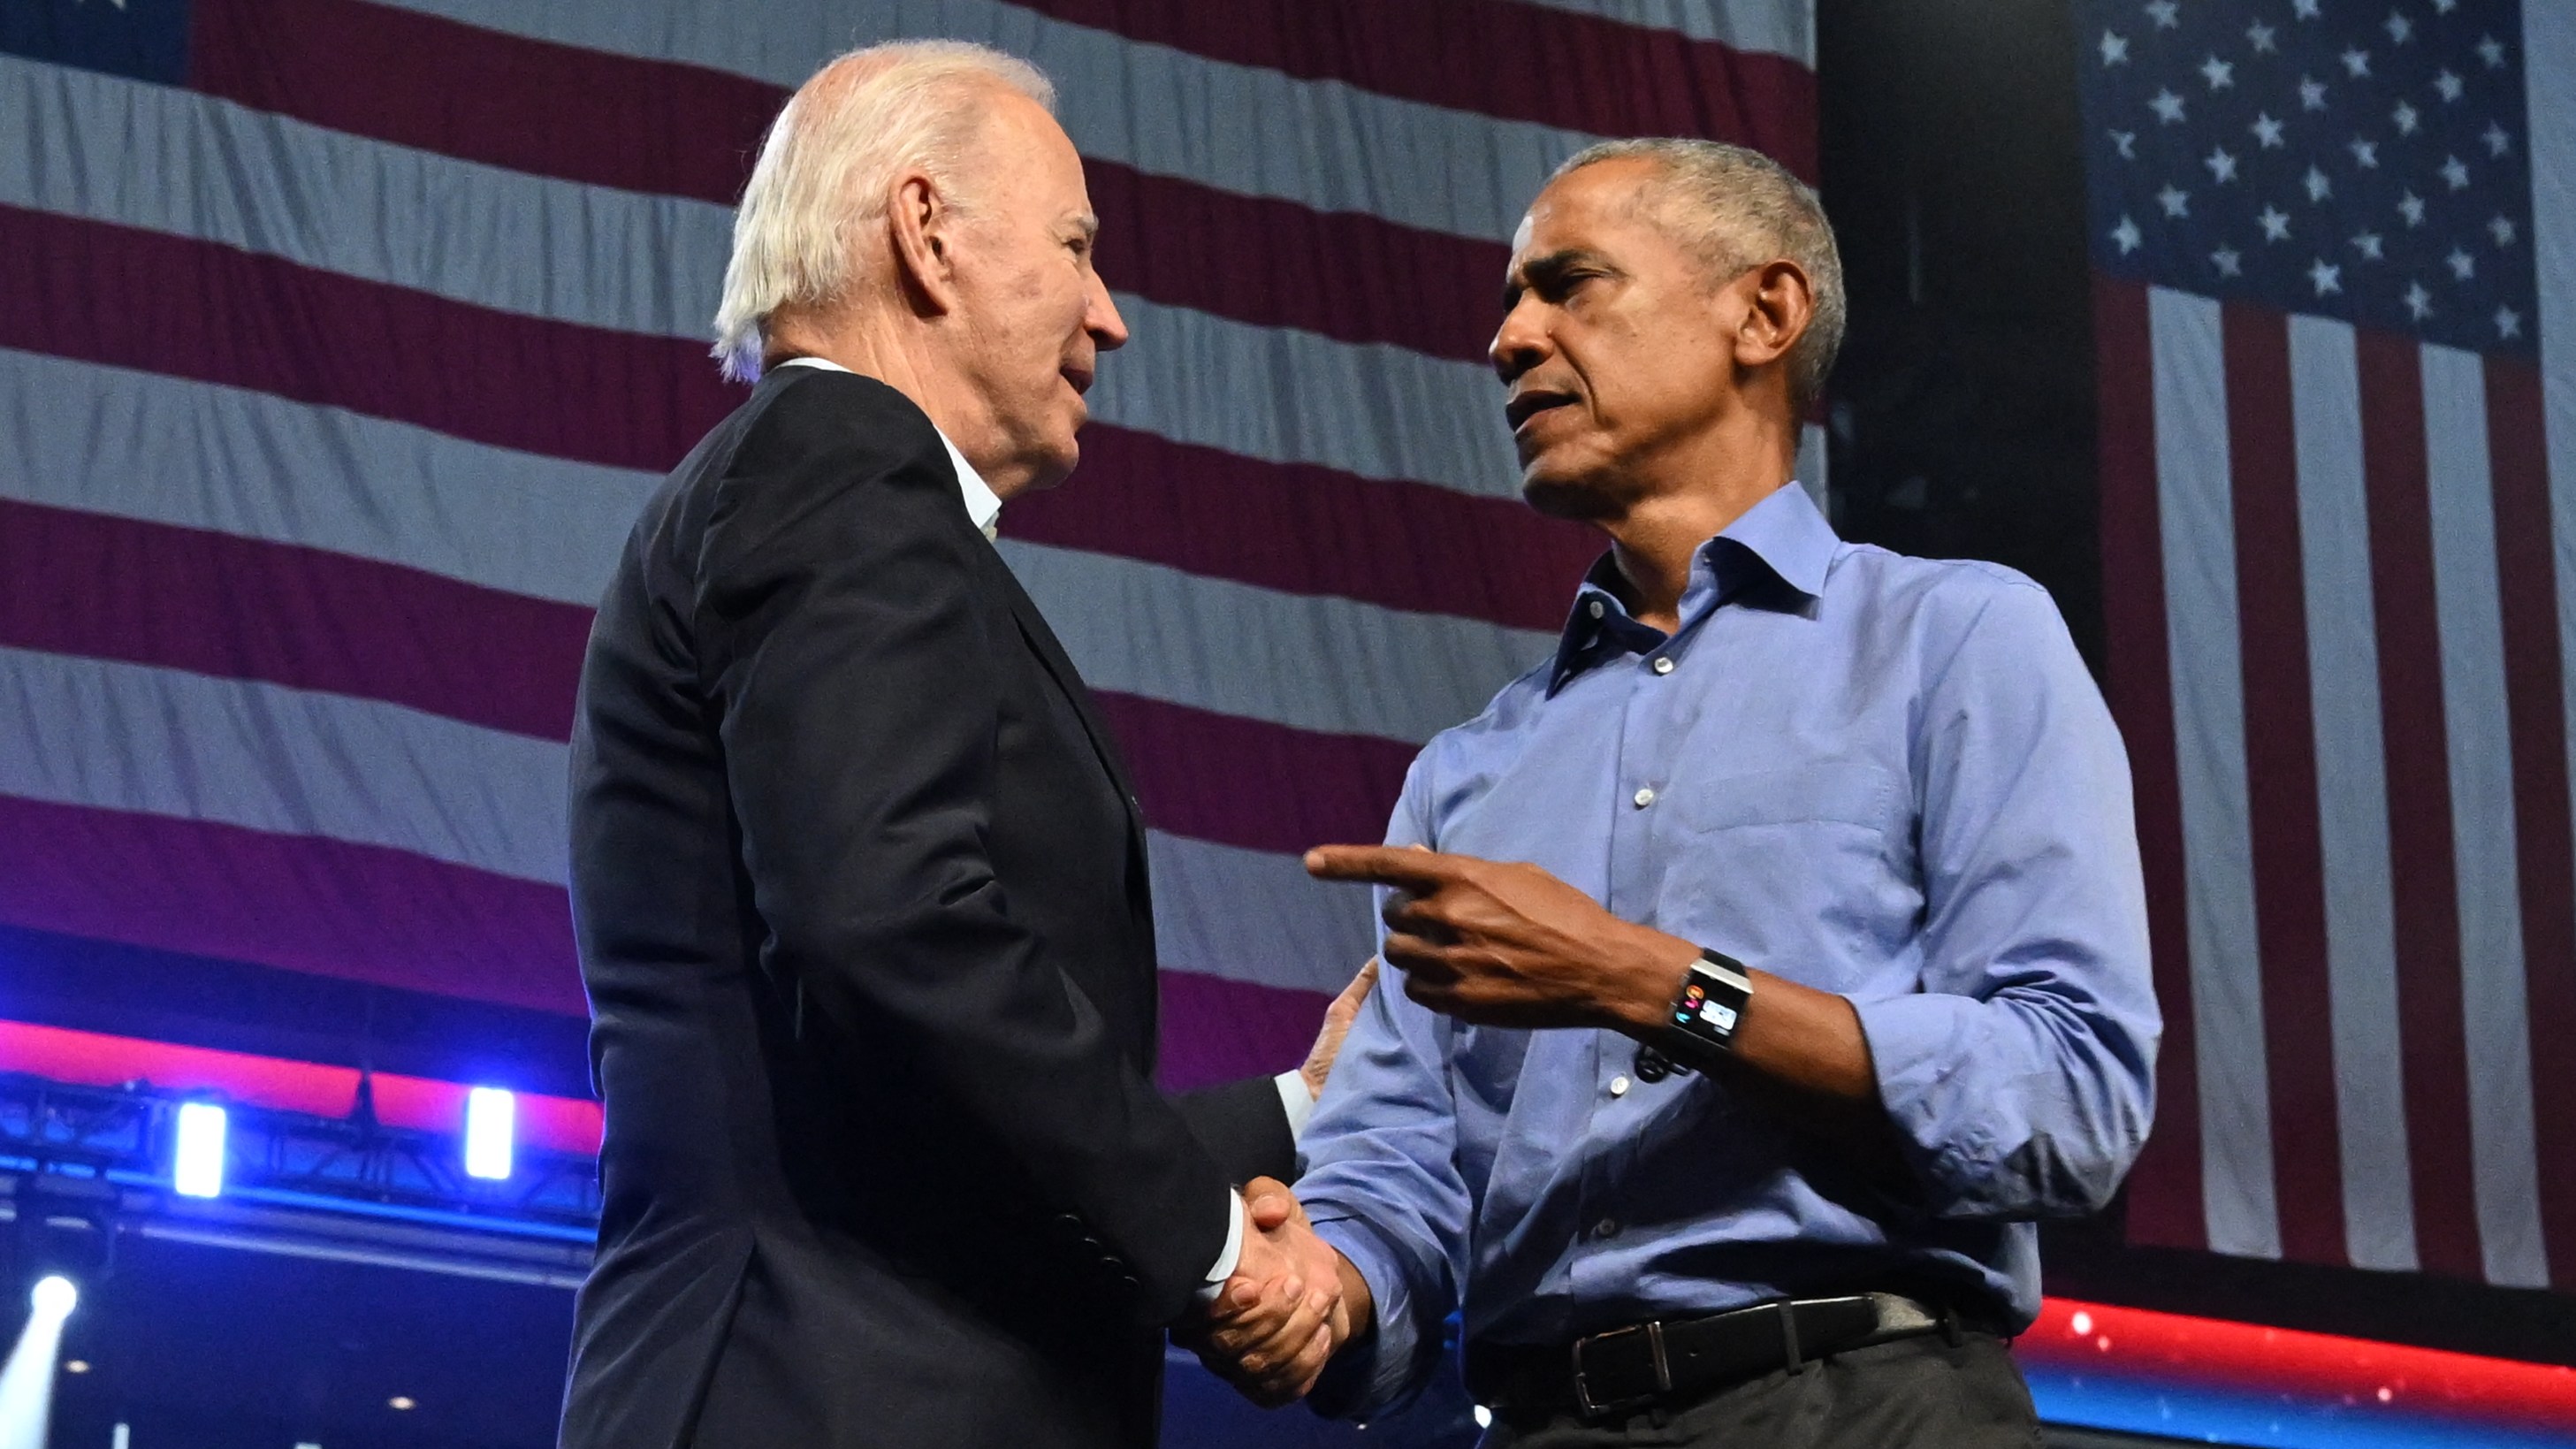 Collectively, Joe Biden and Barack Obama have spent nearly a dozen years in the White House